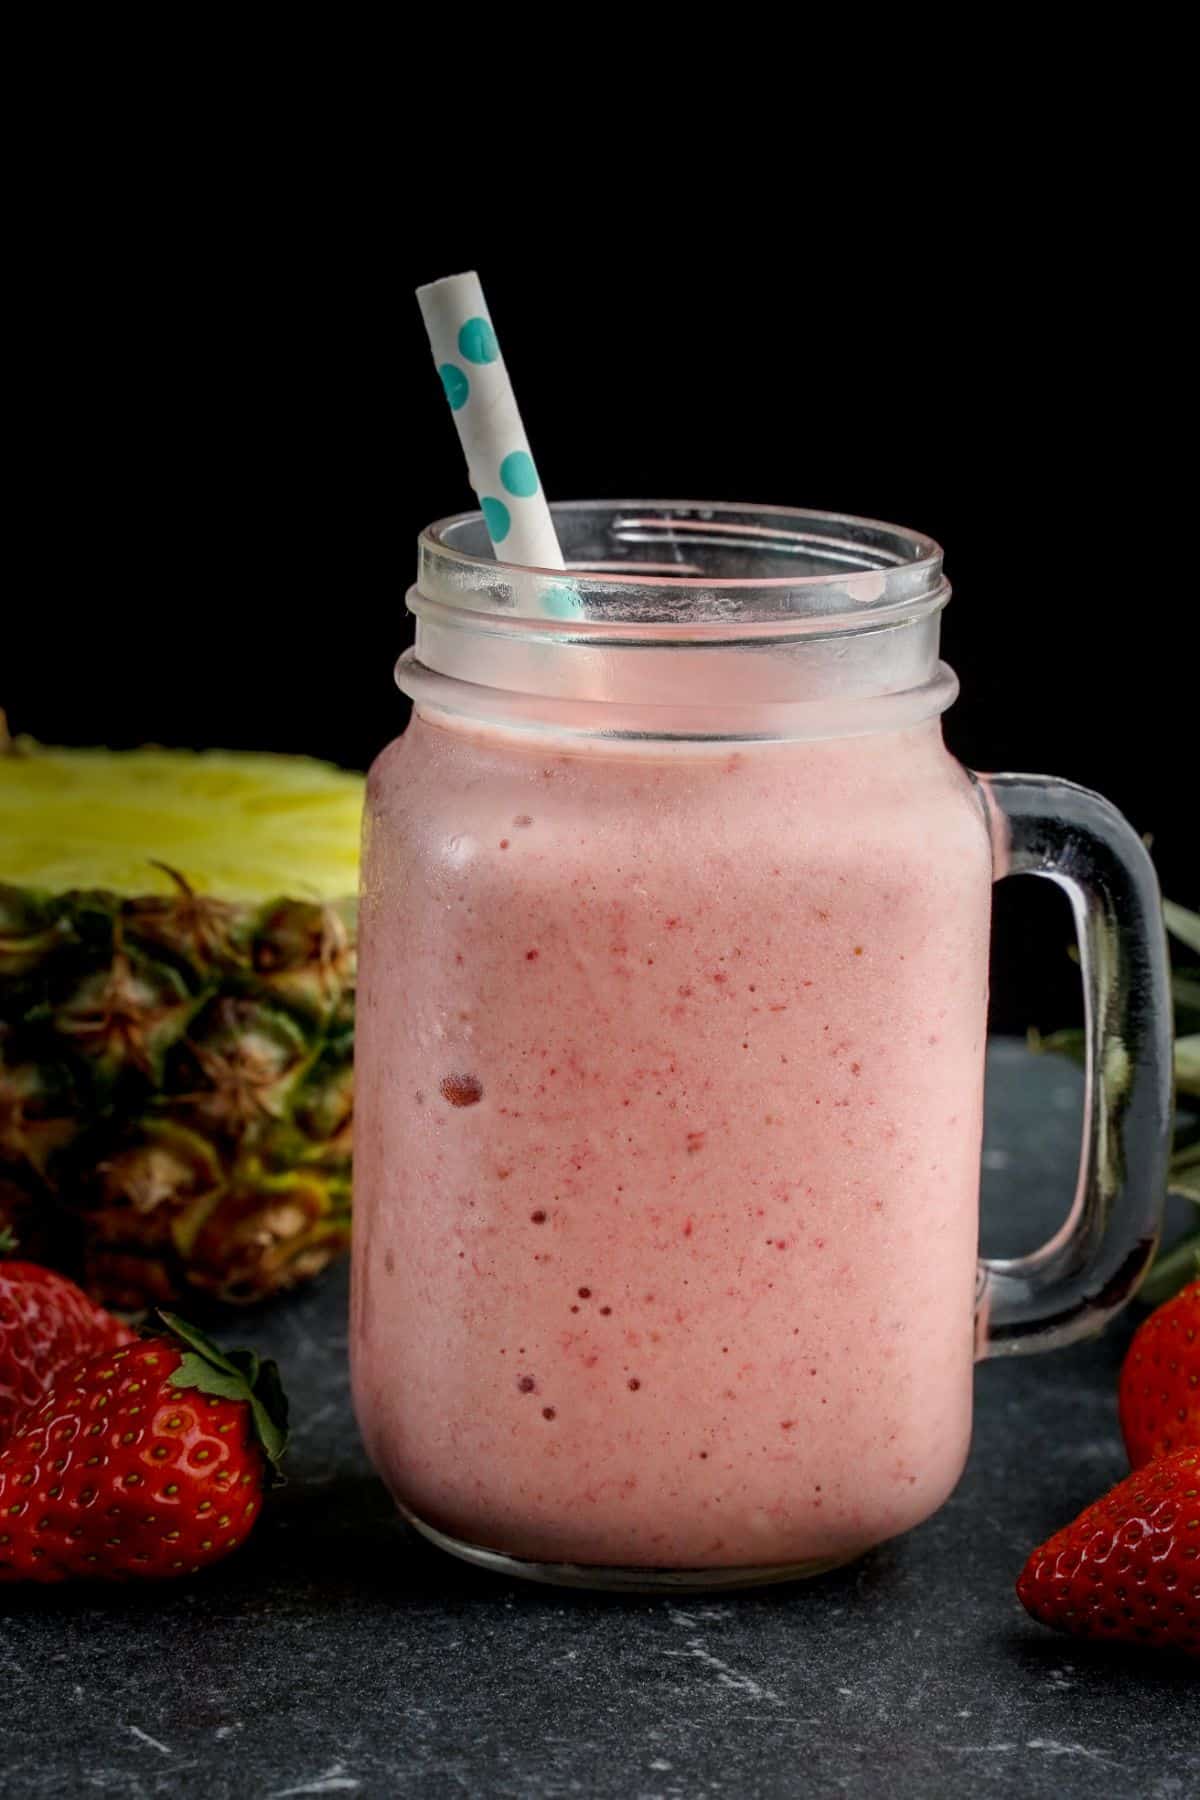 A close-up of a glass jar of Strawberry Pineapple Smoothie with a straw.